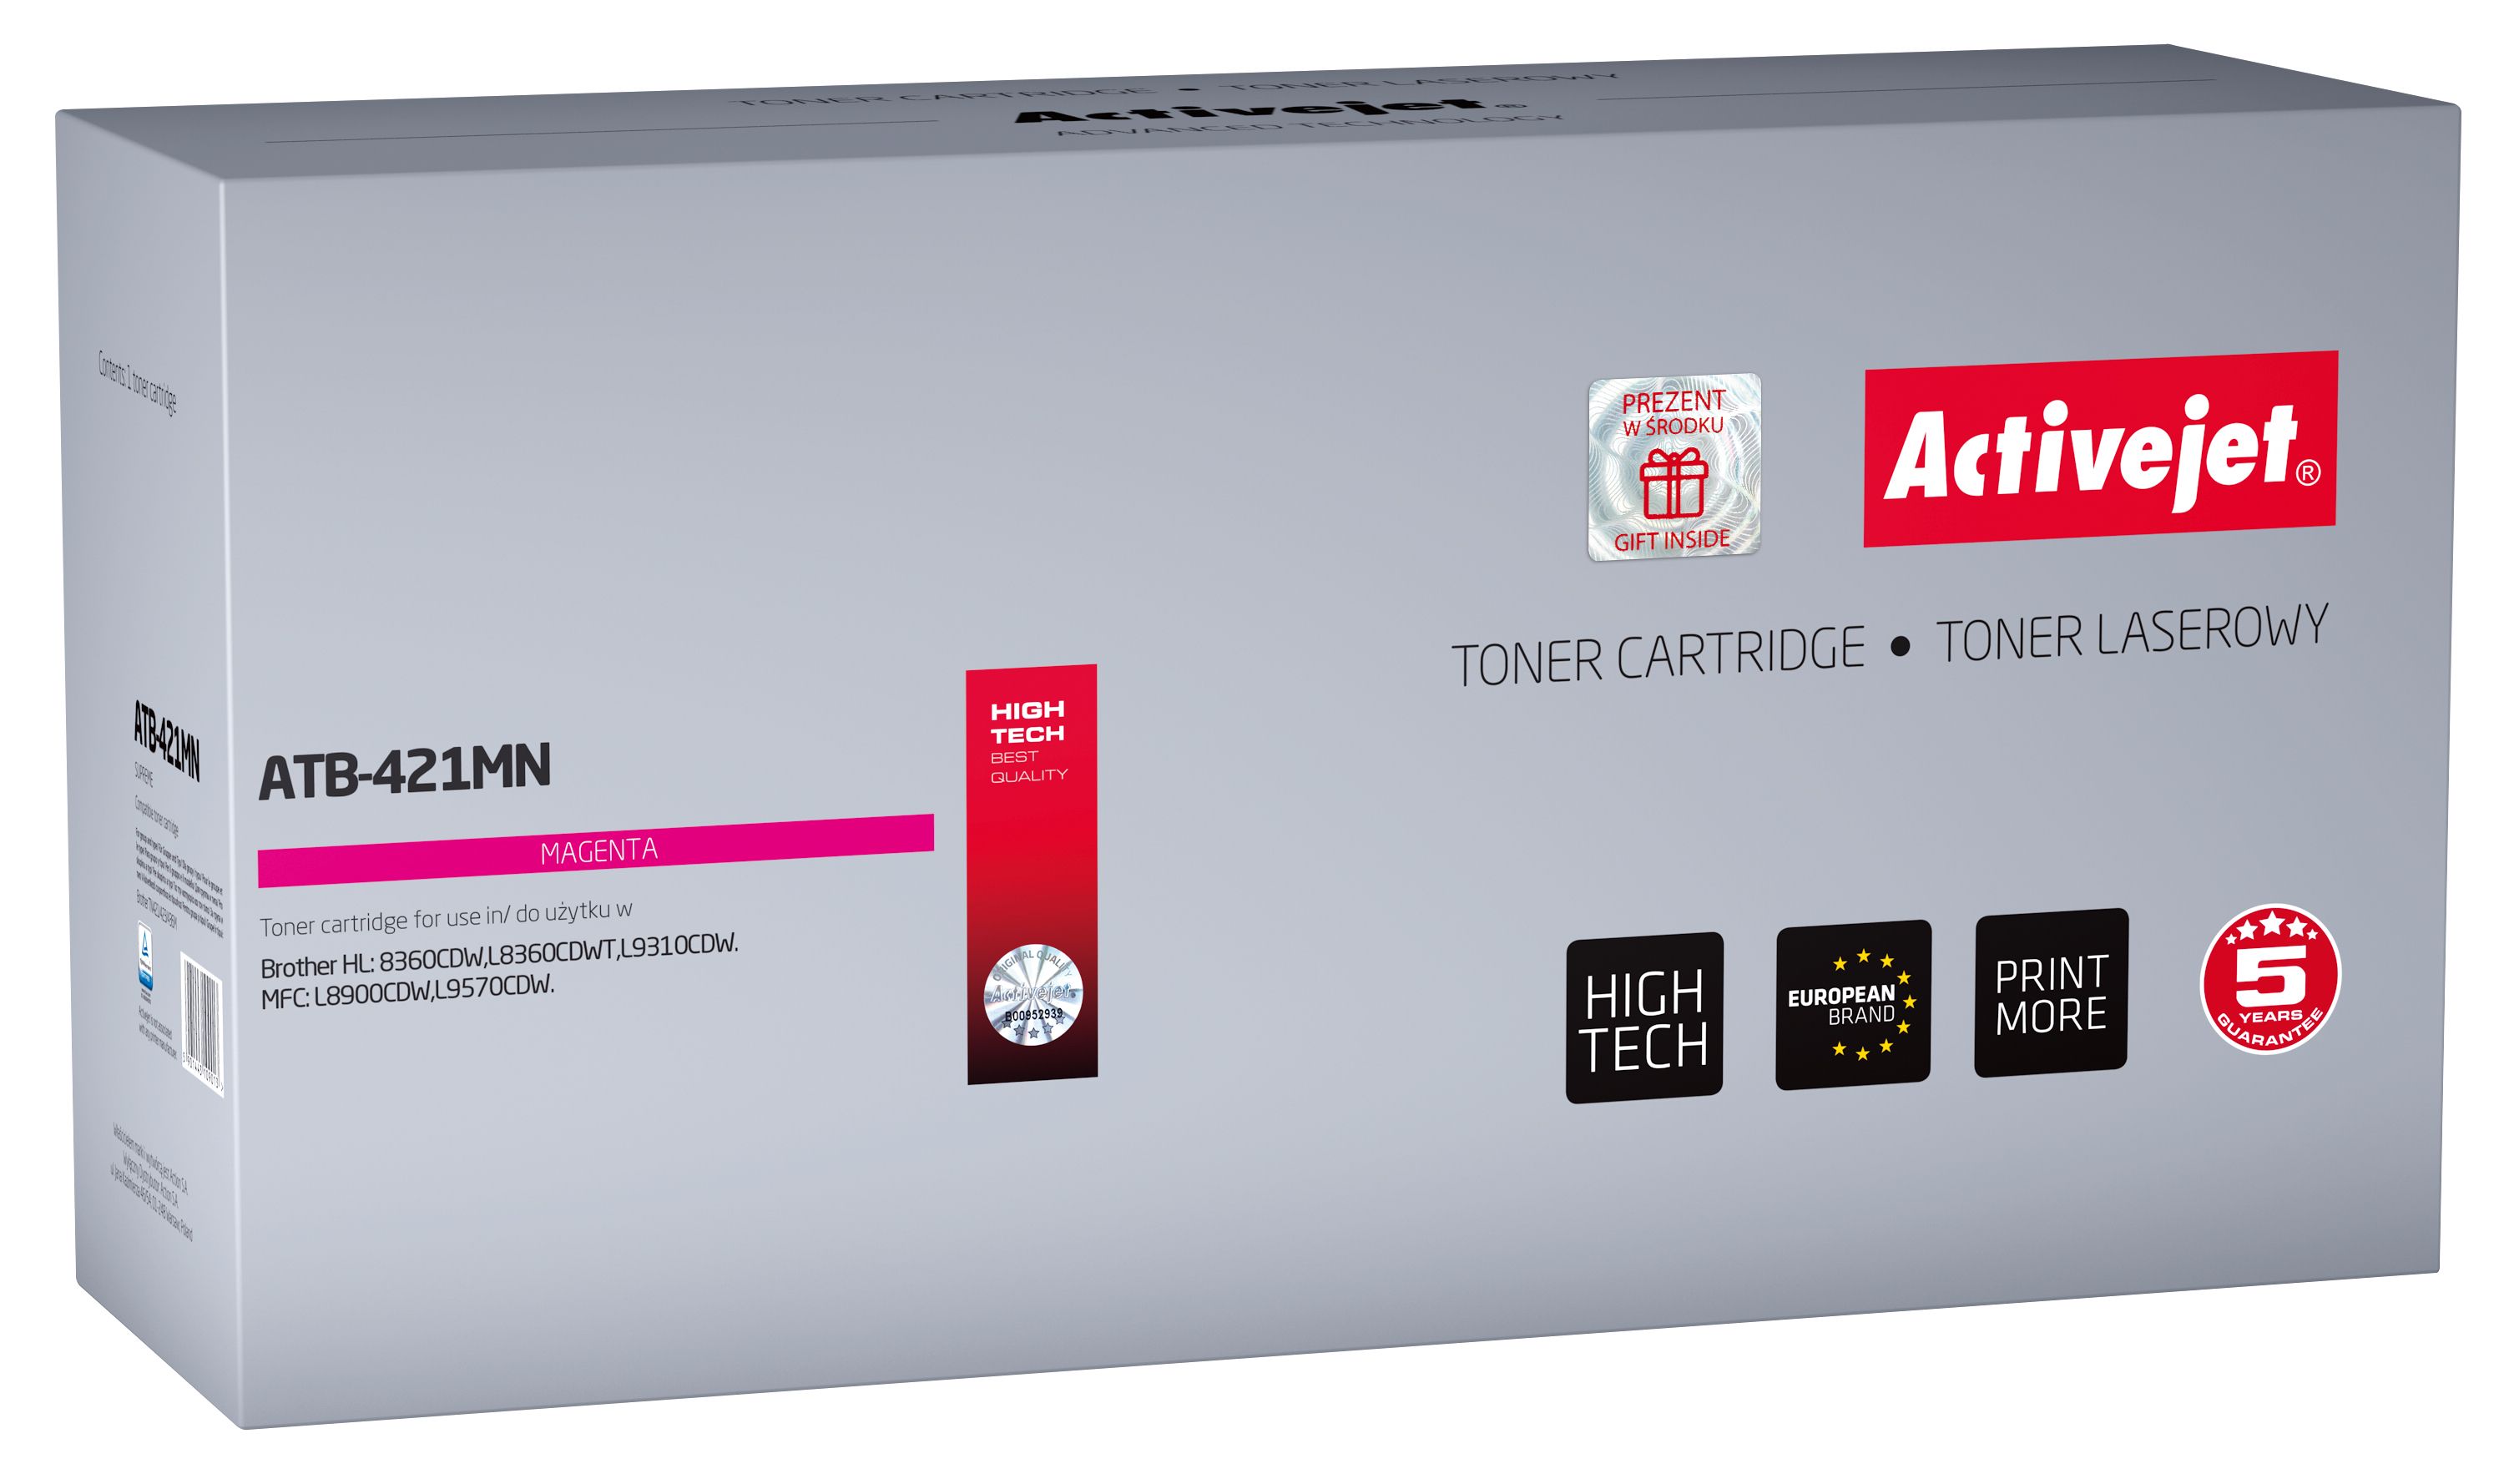 Activejet ATB-421MN toner for Brother printer; Brother TN-421M replacement; Supreme; 1800 pages; magenta